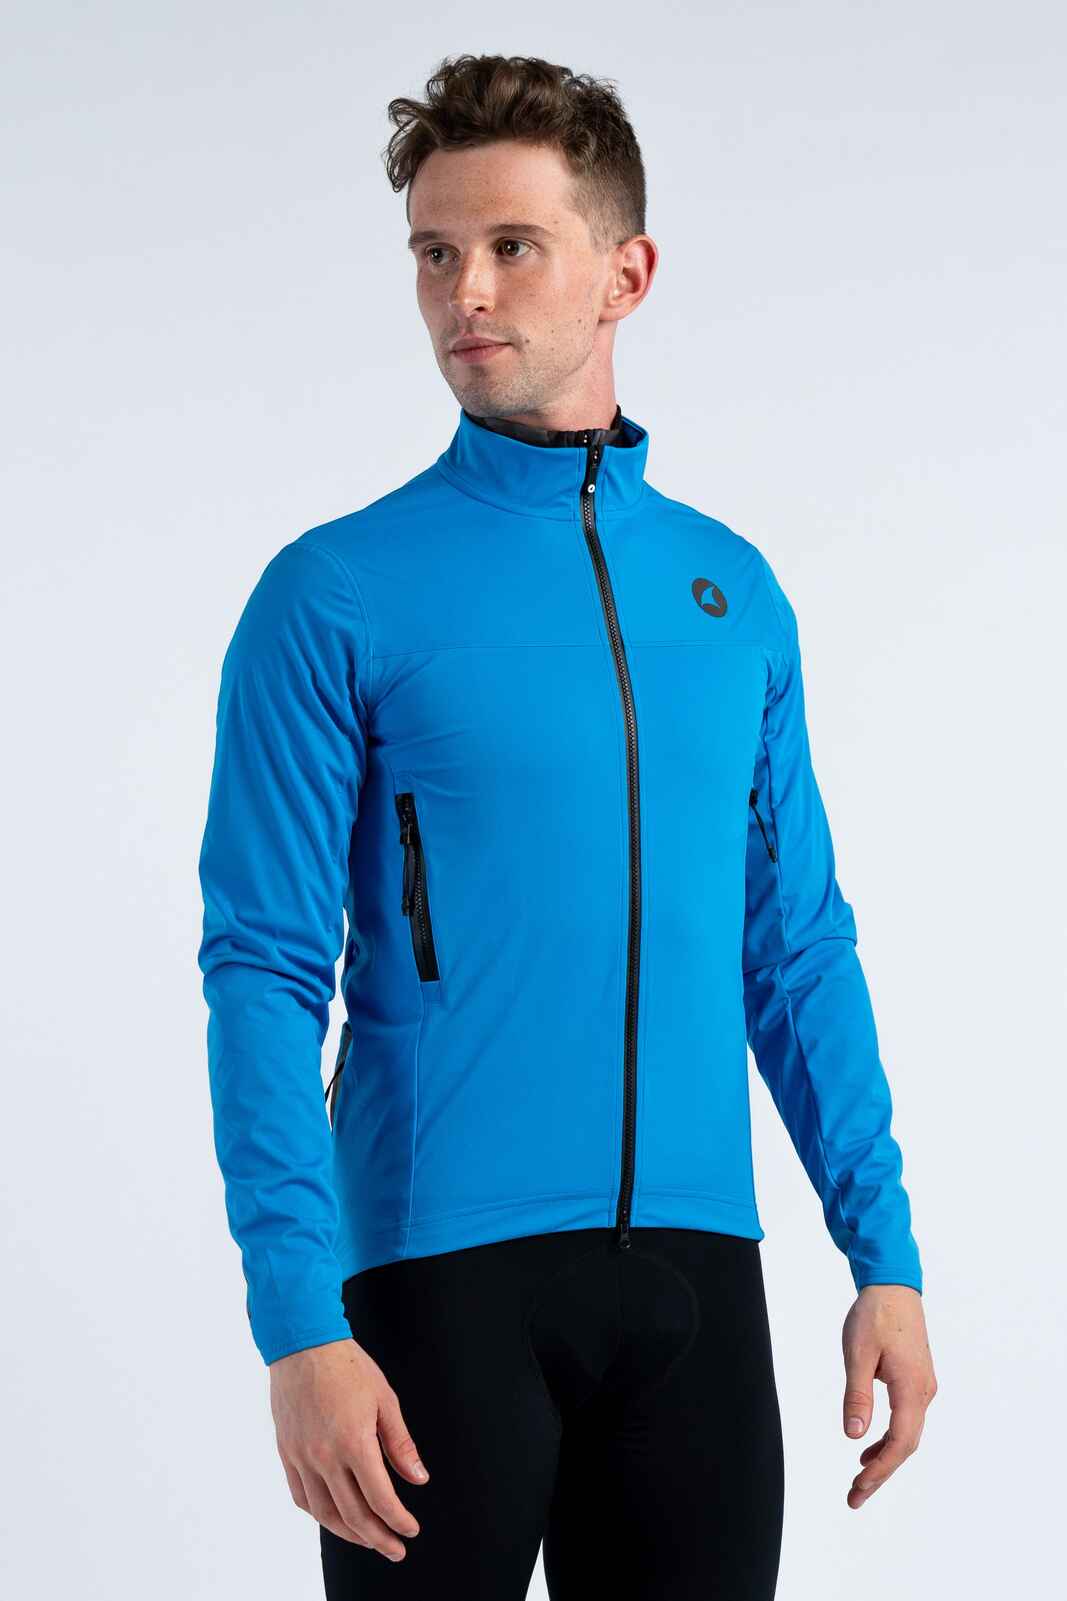 Men's Blue Cycling Jacket for Cold Wet Weather - Front View